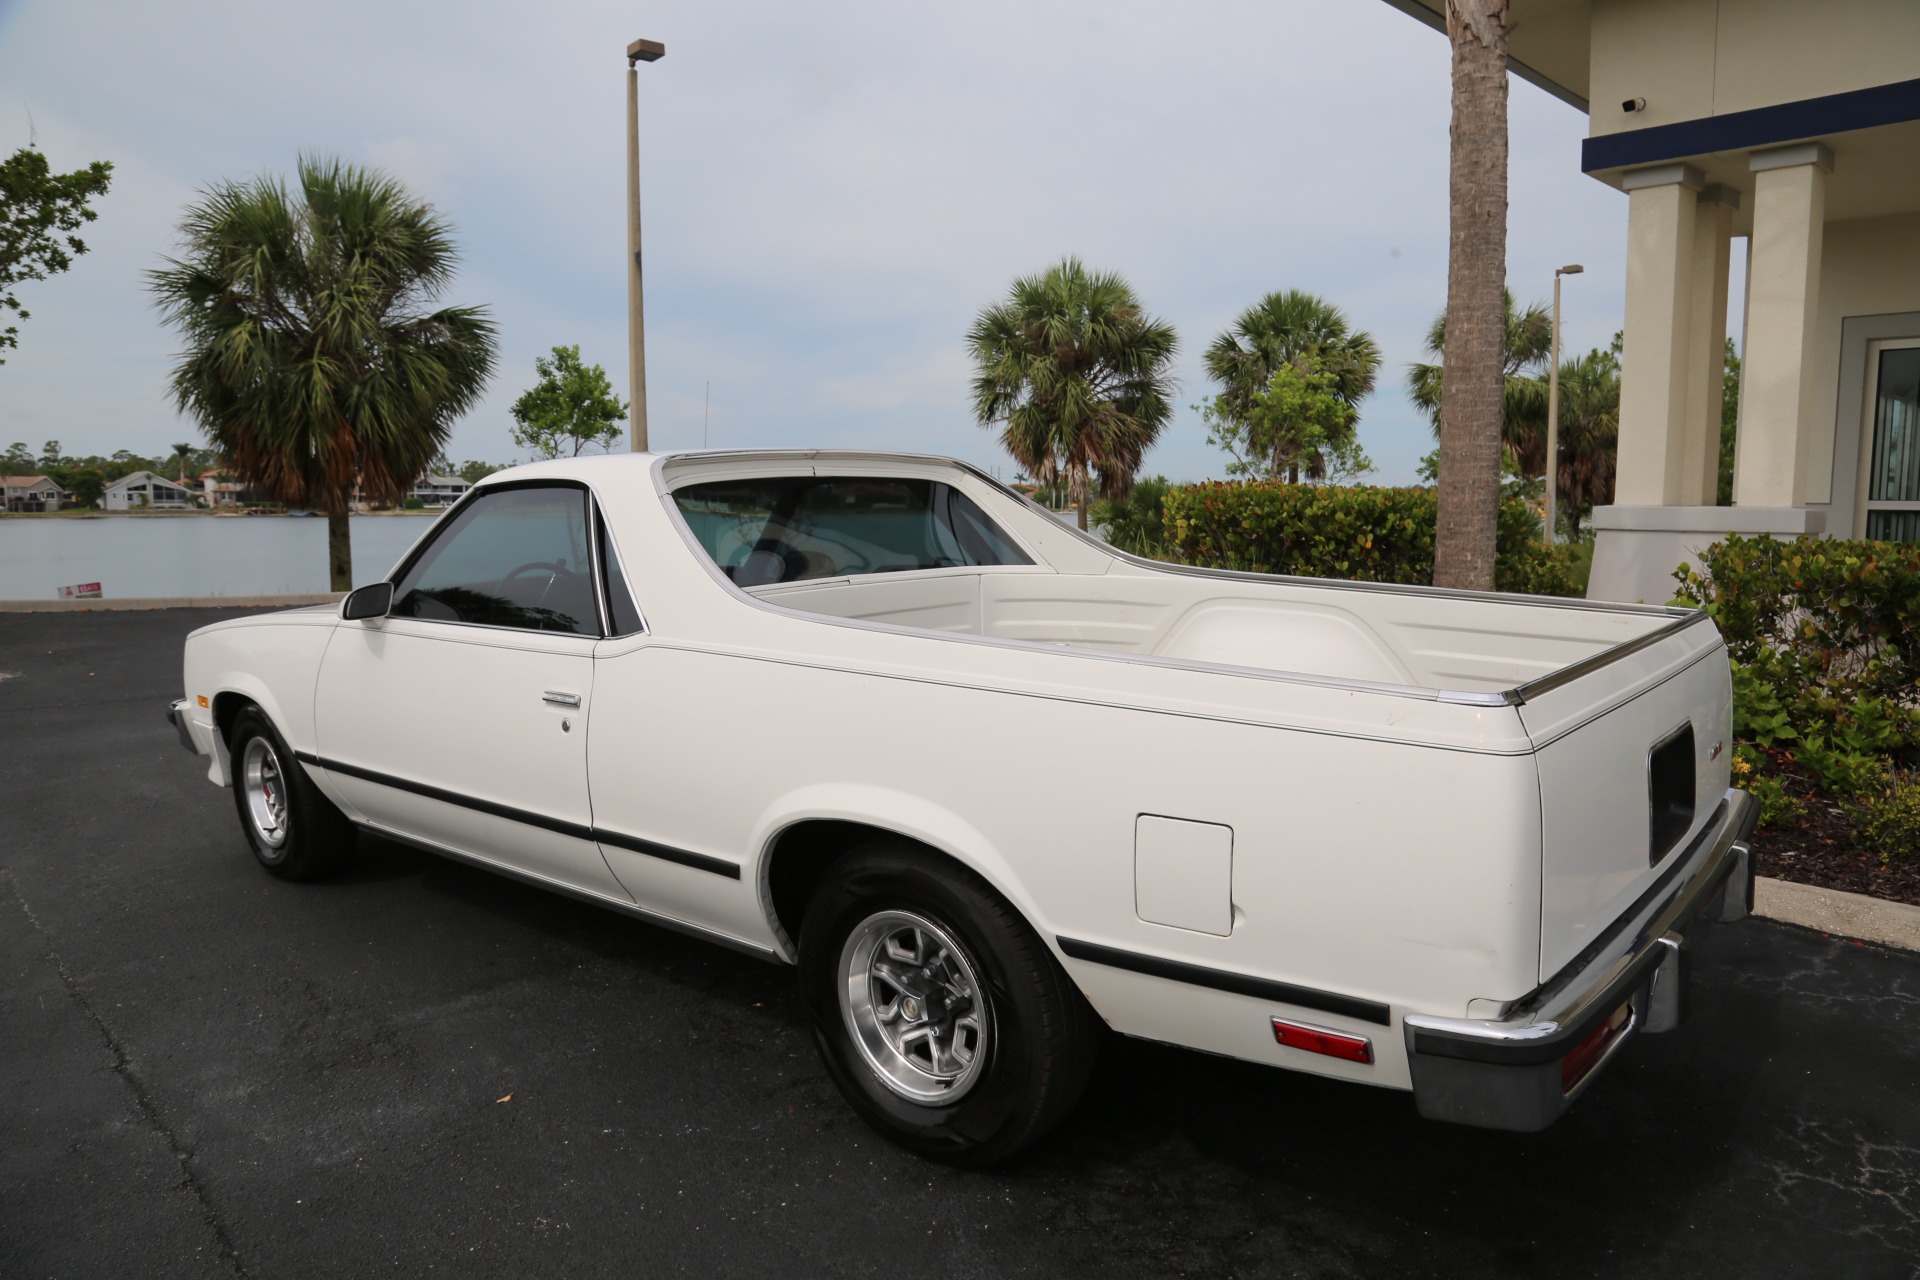 Used 1986 GMC Caballero Caballero For Sale ($16,000) | Muscle Cars for ...